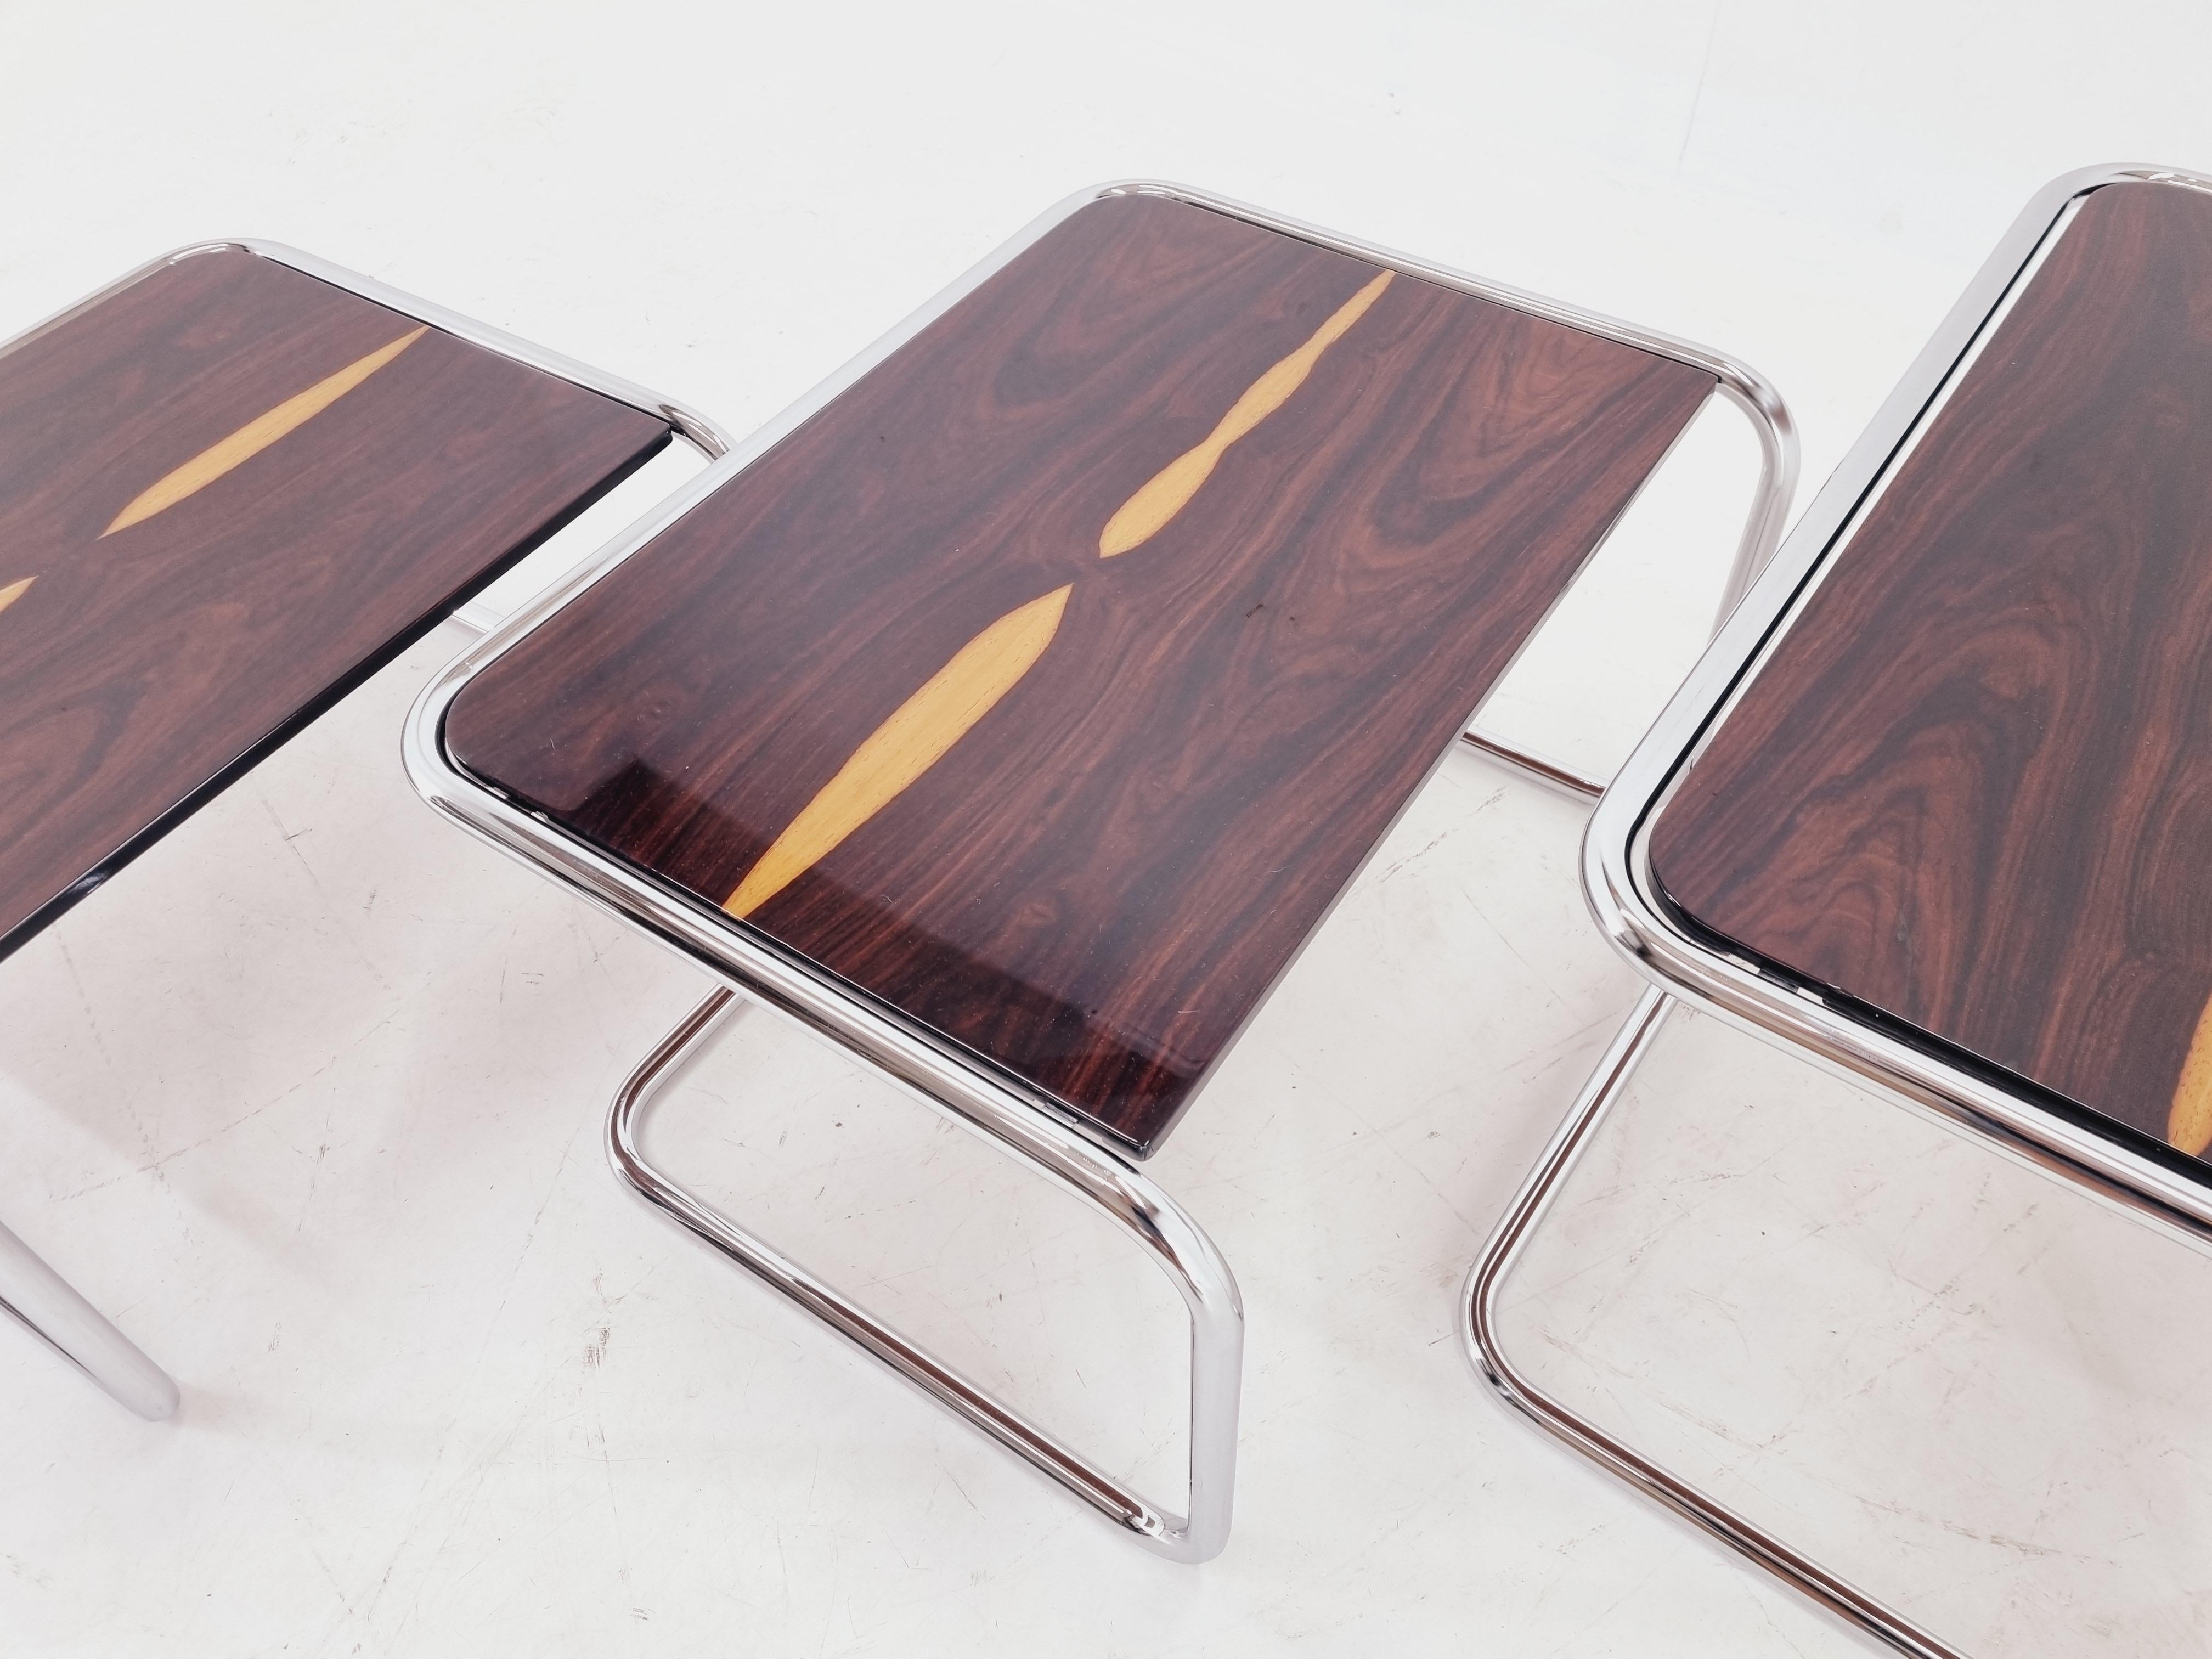 Exclusive Rare Midcentury Nesting Tables, Cocobolo Palisandr and Chrome, 1950s. For Sale 8